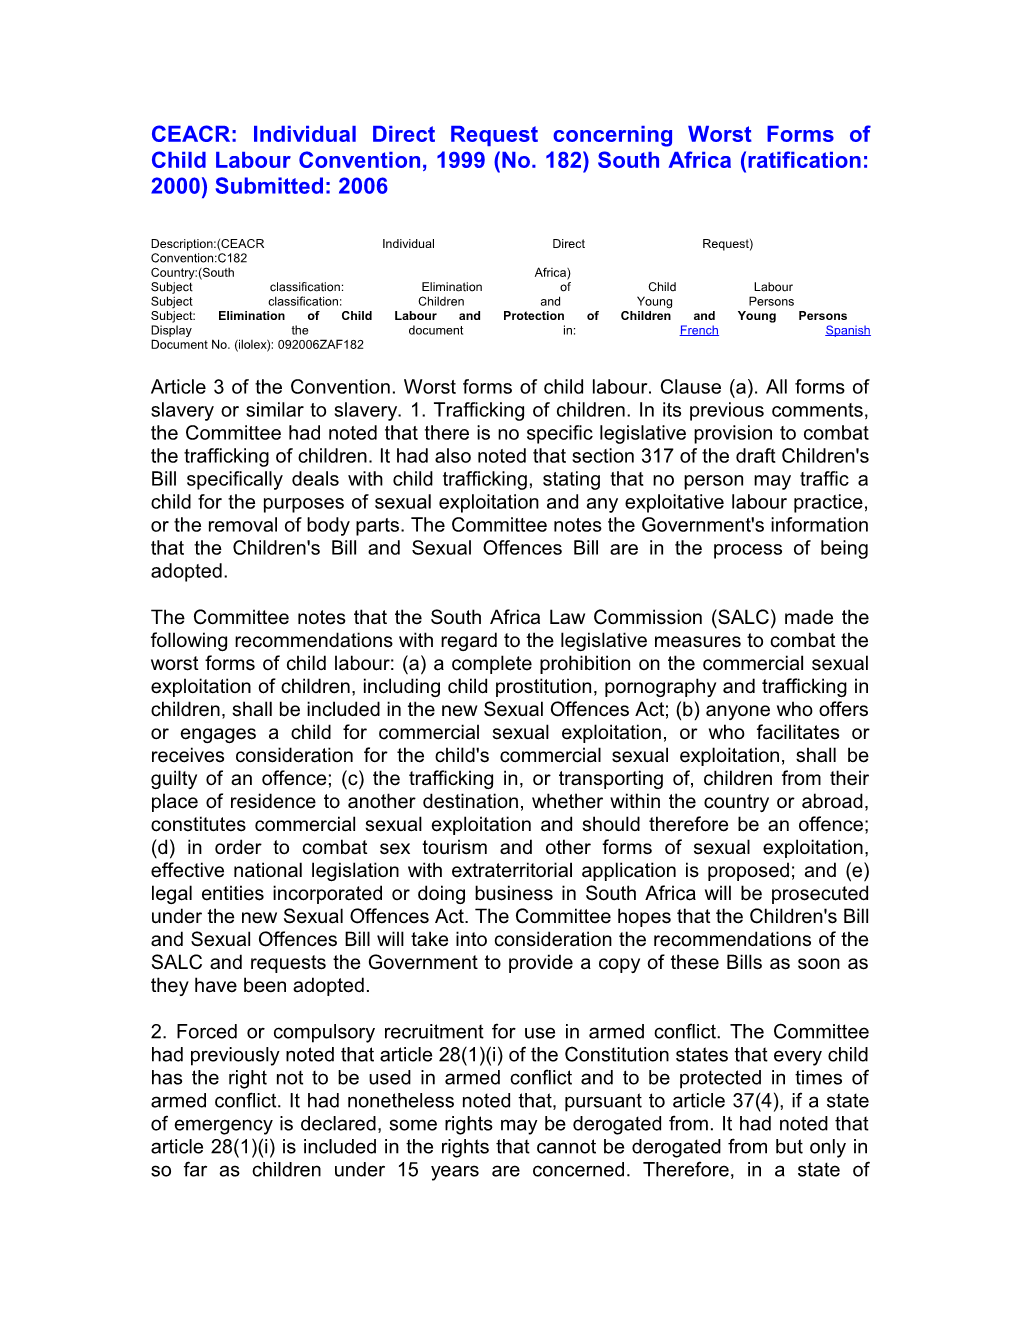 CEACR: Individual Direct Request Concerning Worst Forms of Child Labour Convention, 1999 (No